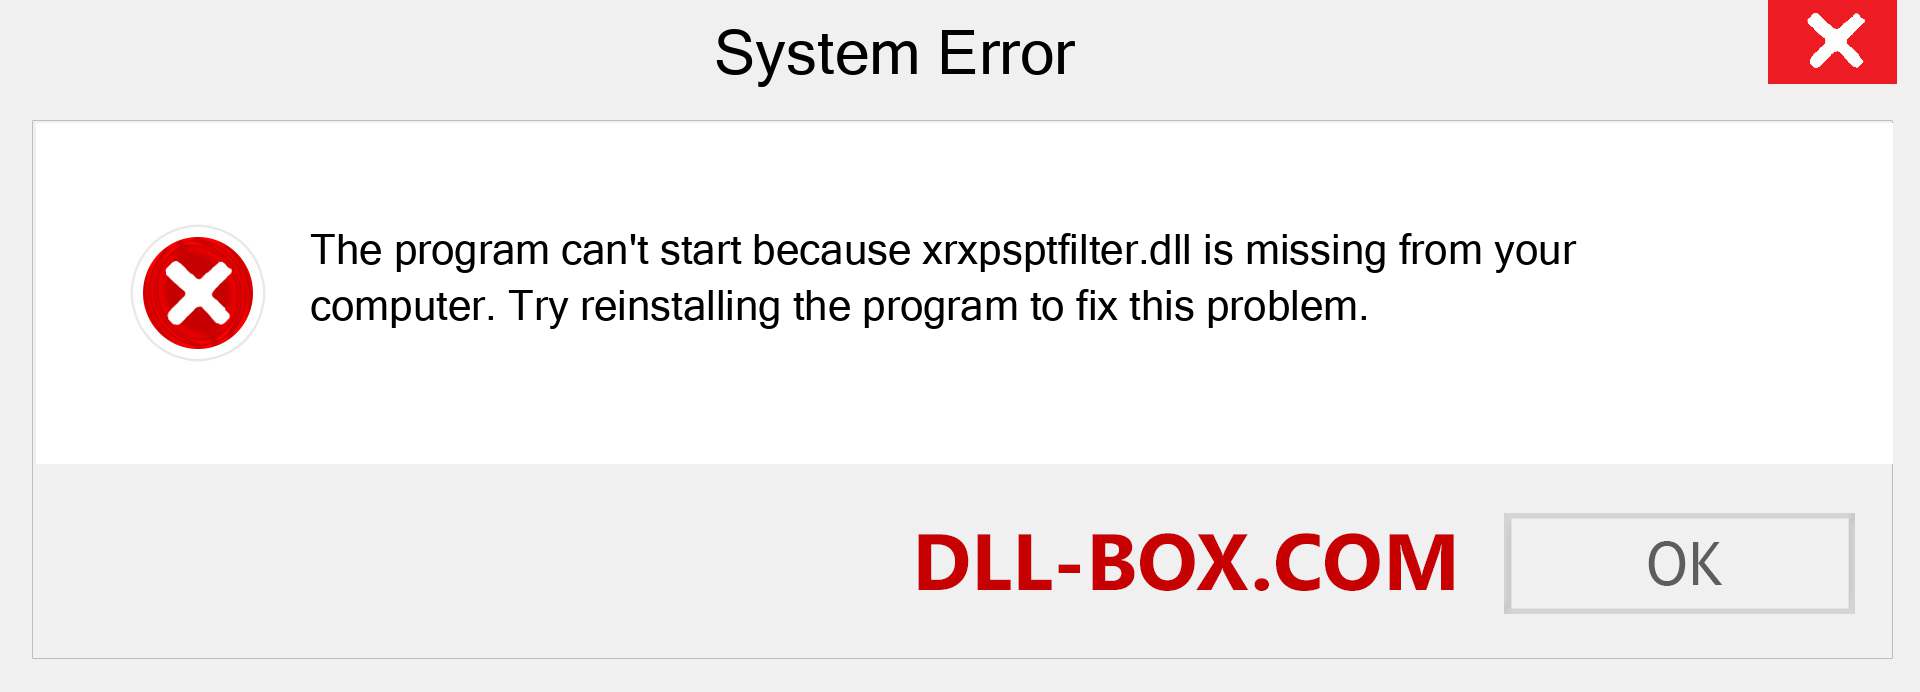  xrxpsptfilter.dll file is missing?. Download for Windows 7, 8, 10 - Fix  xrxpsptfilter dll Missing Error on Windows, photos, images